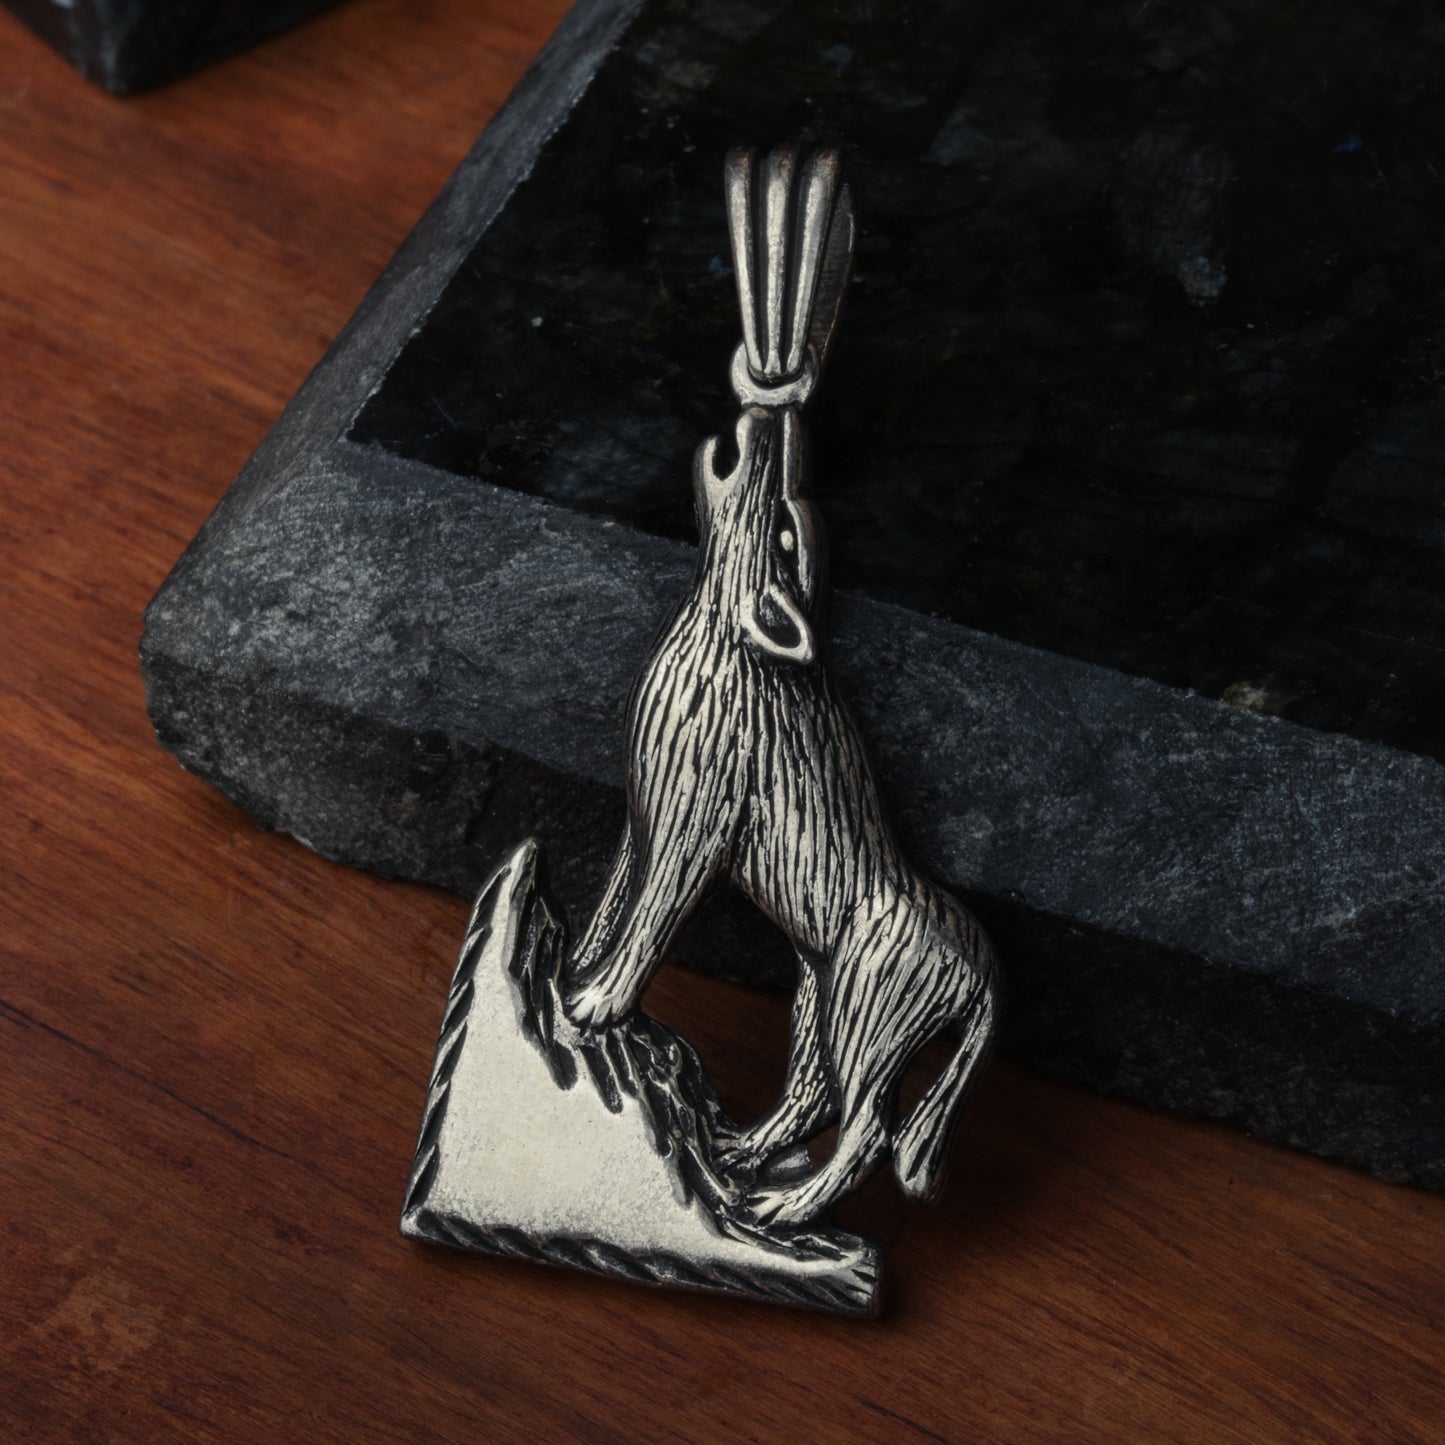 Silver Howling Wolf Pendant